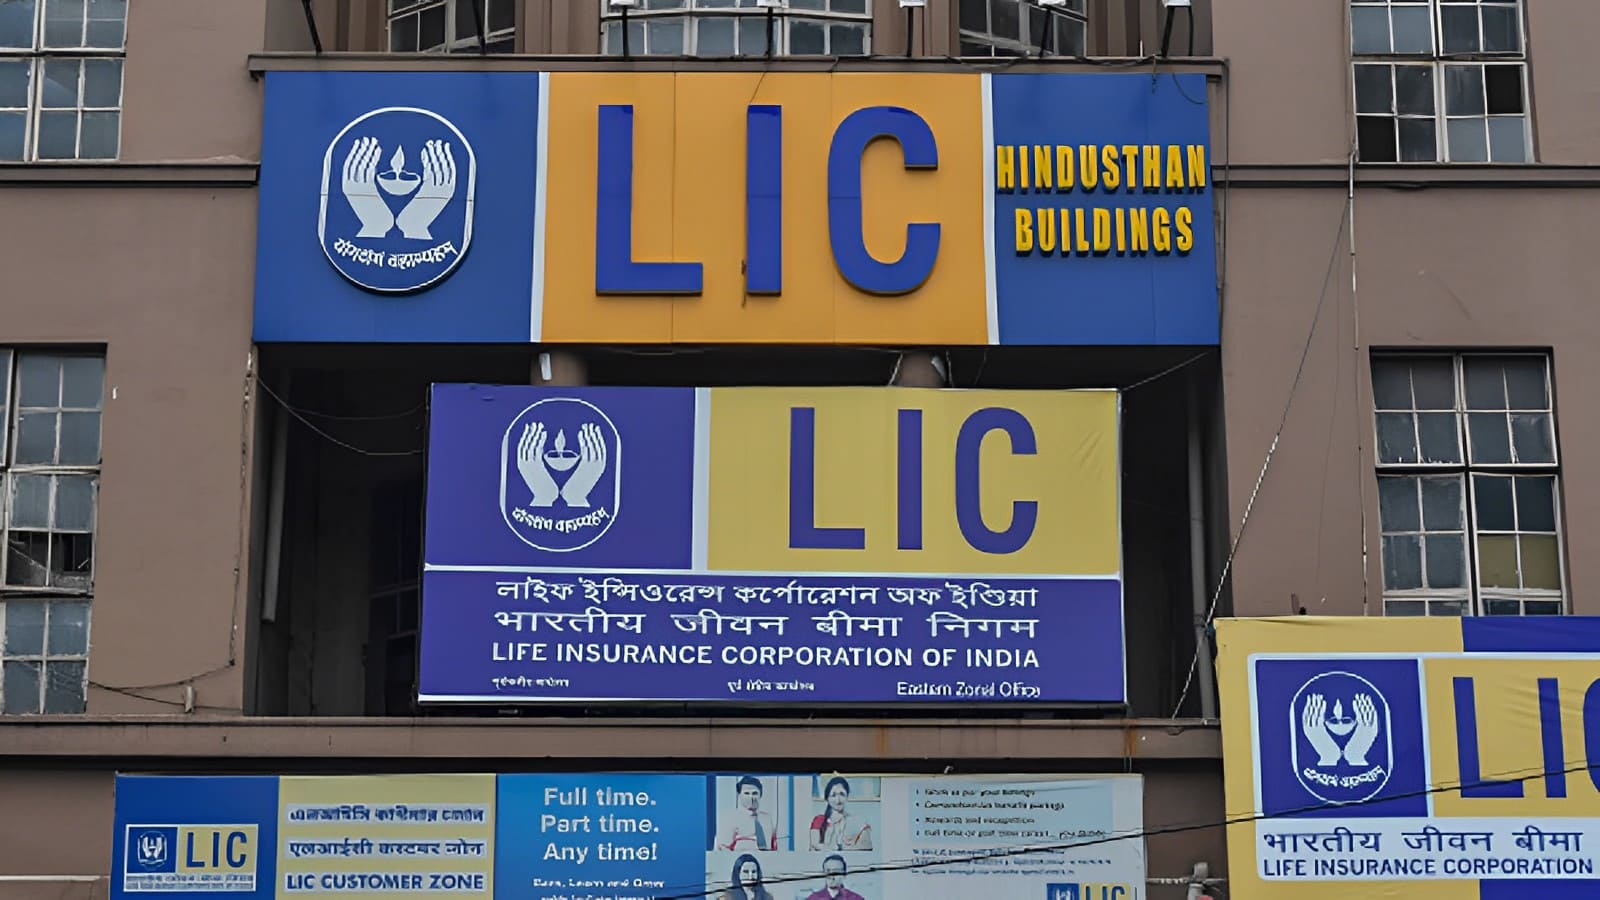 LIC faces Rs 290 Crore GST bill from Bihar tax department